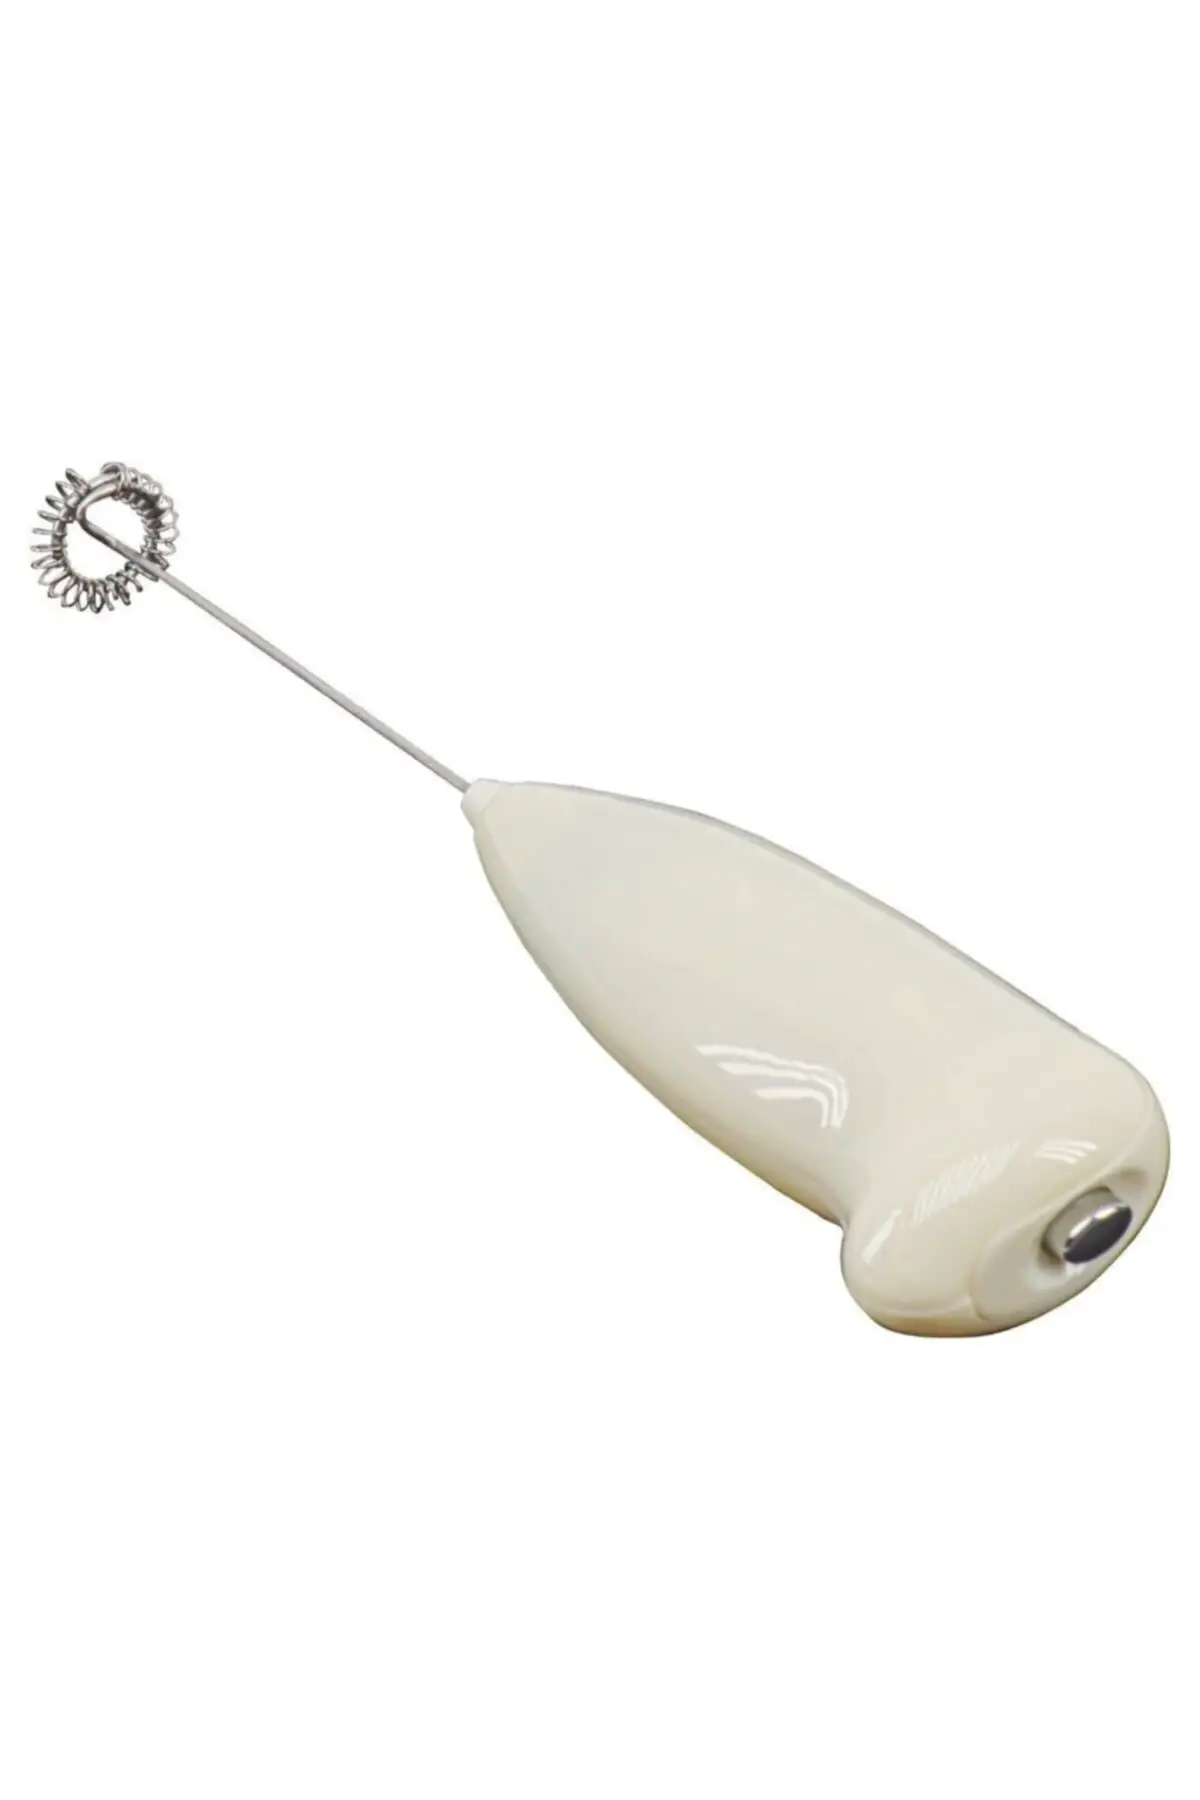 Milk frother beater Whisking Coffee Stirrer